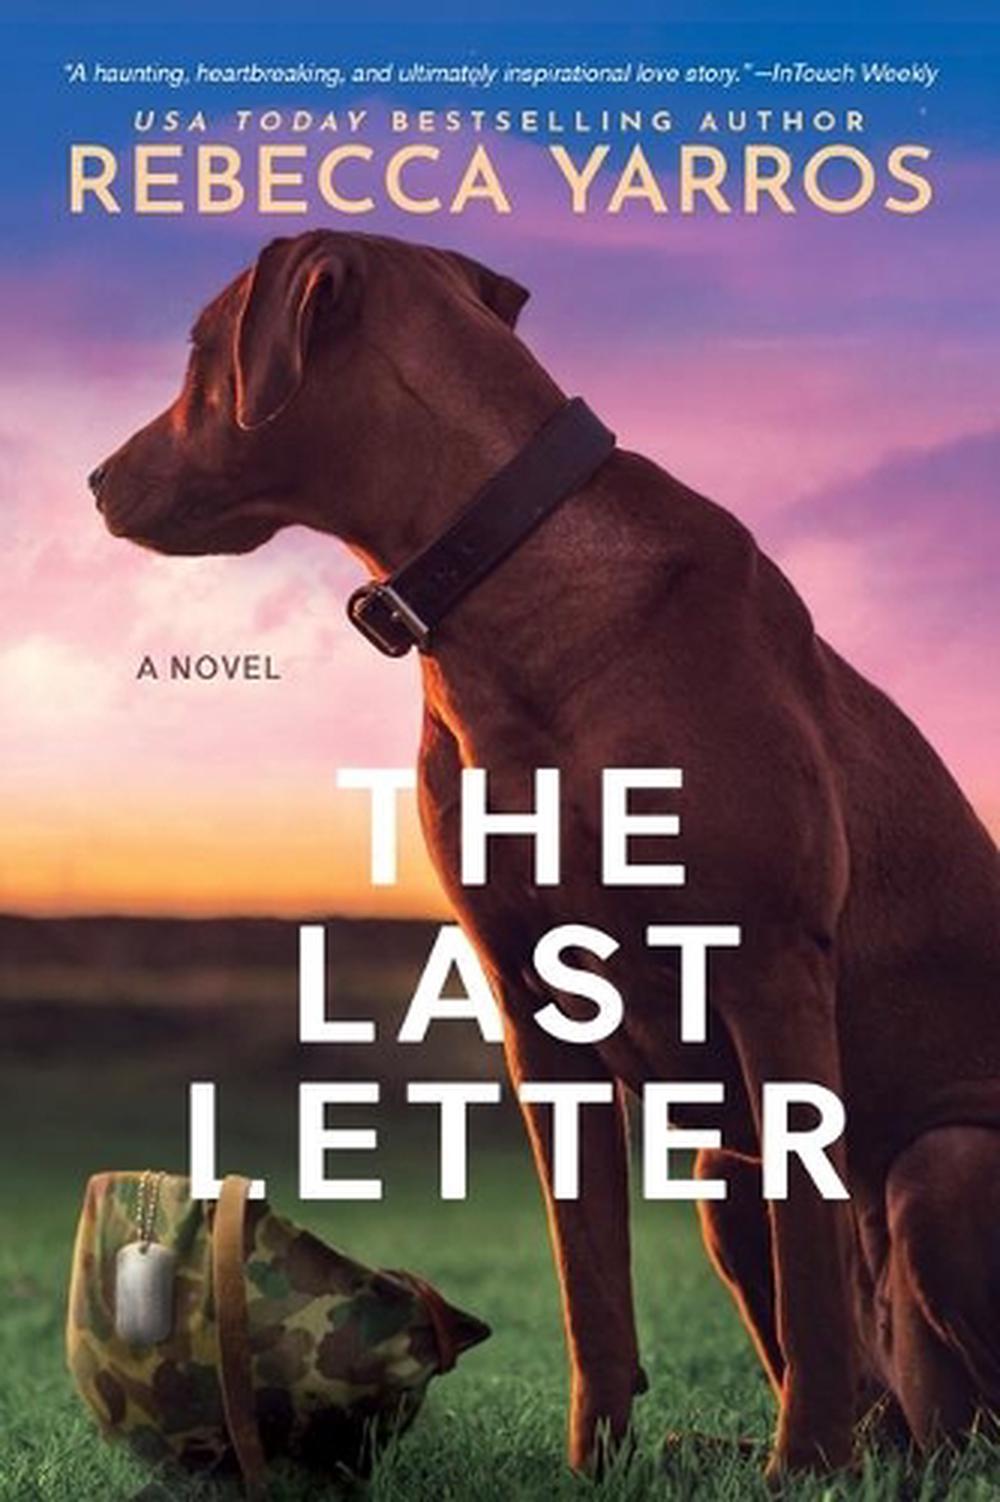 the-last-letter-by-rebecca-yarros-english-mass-market-paperback-book